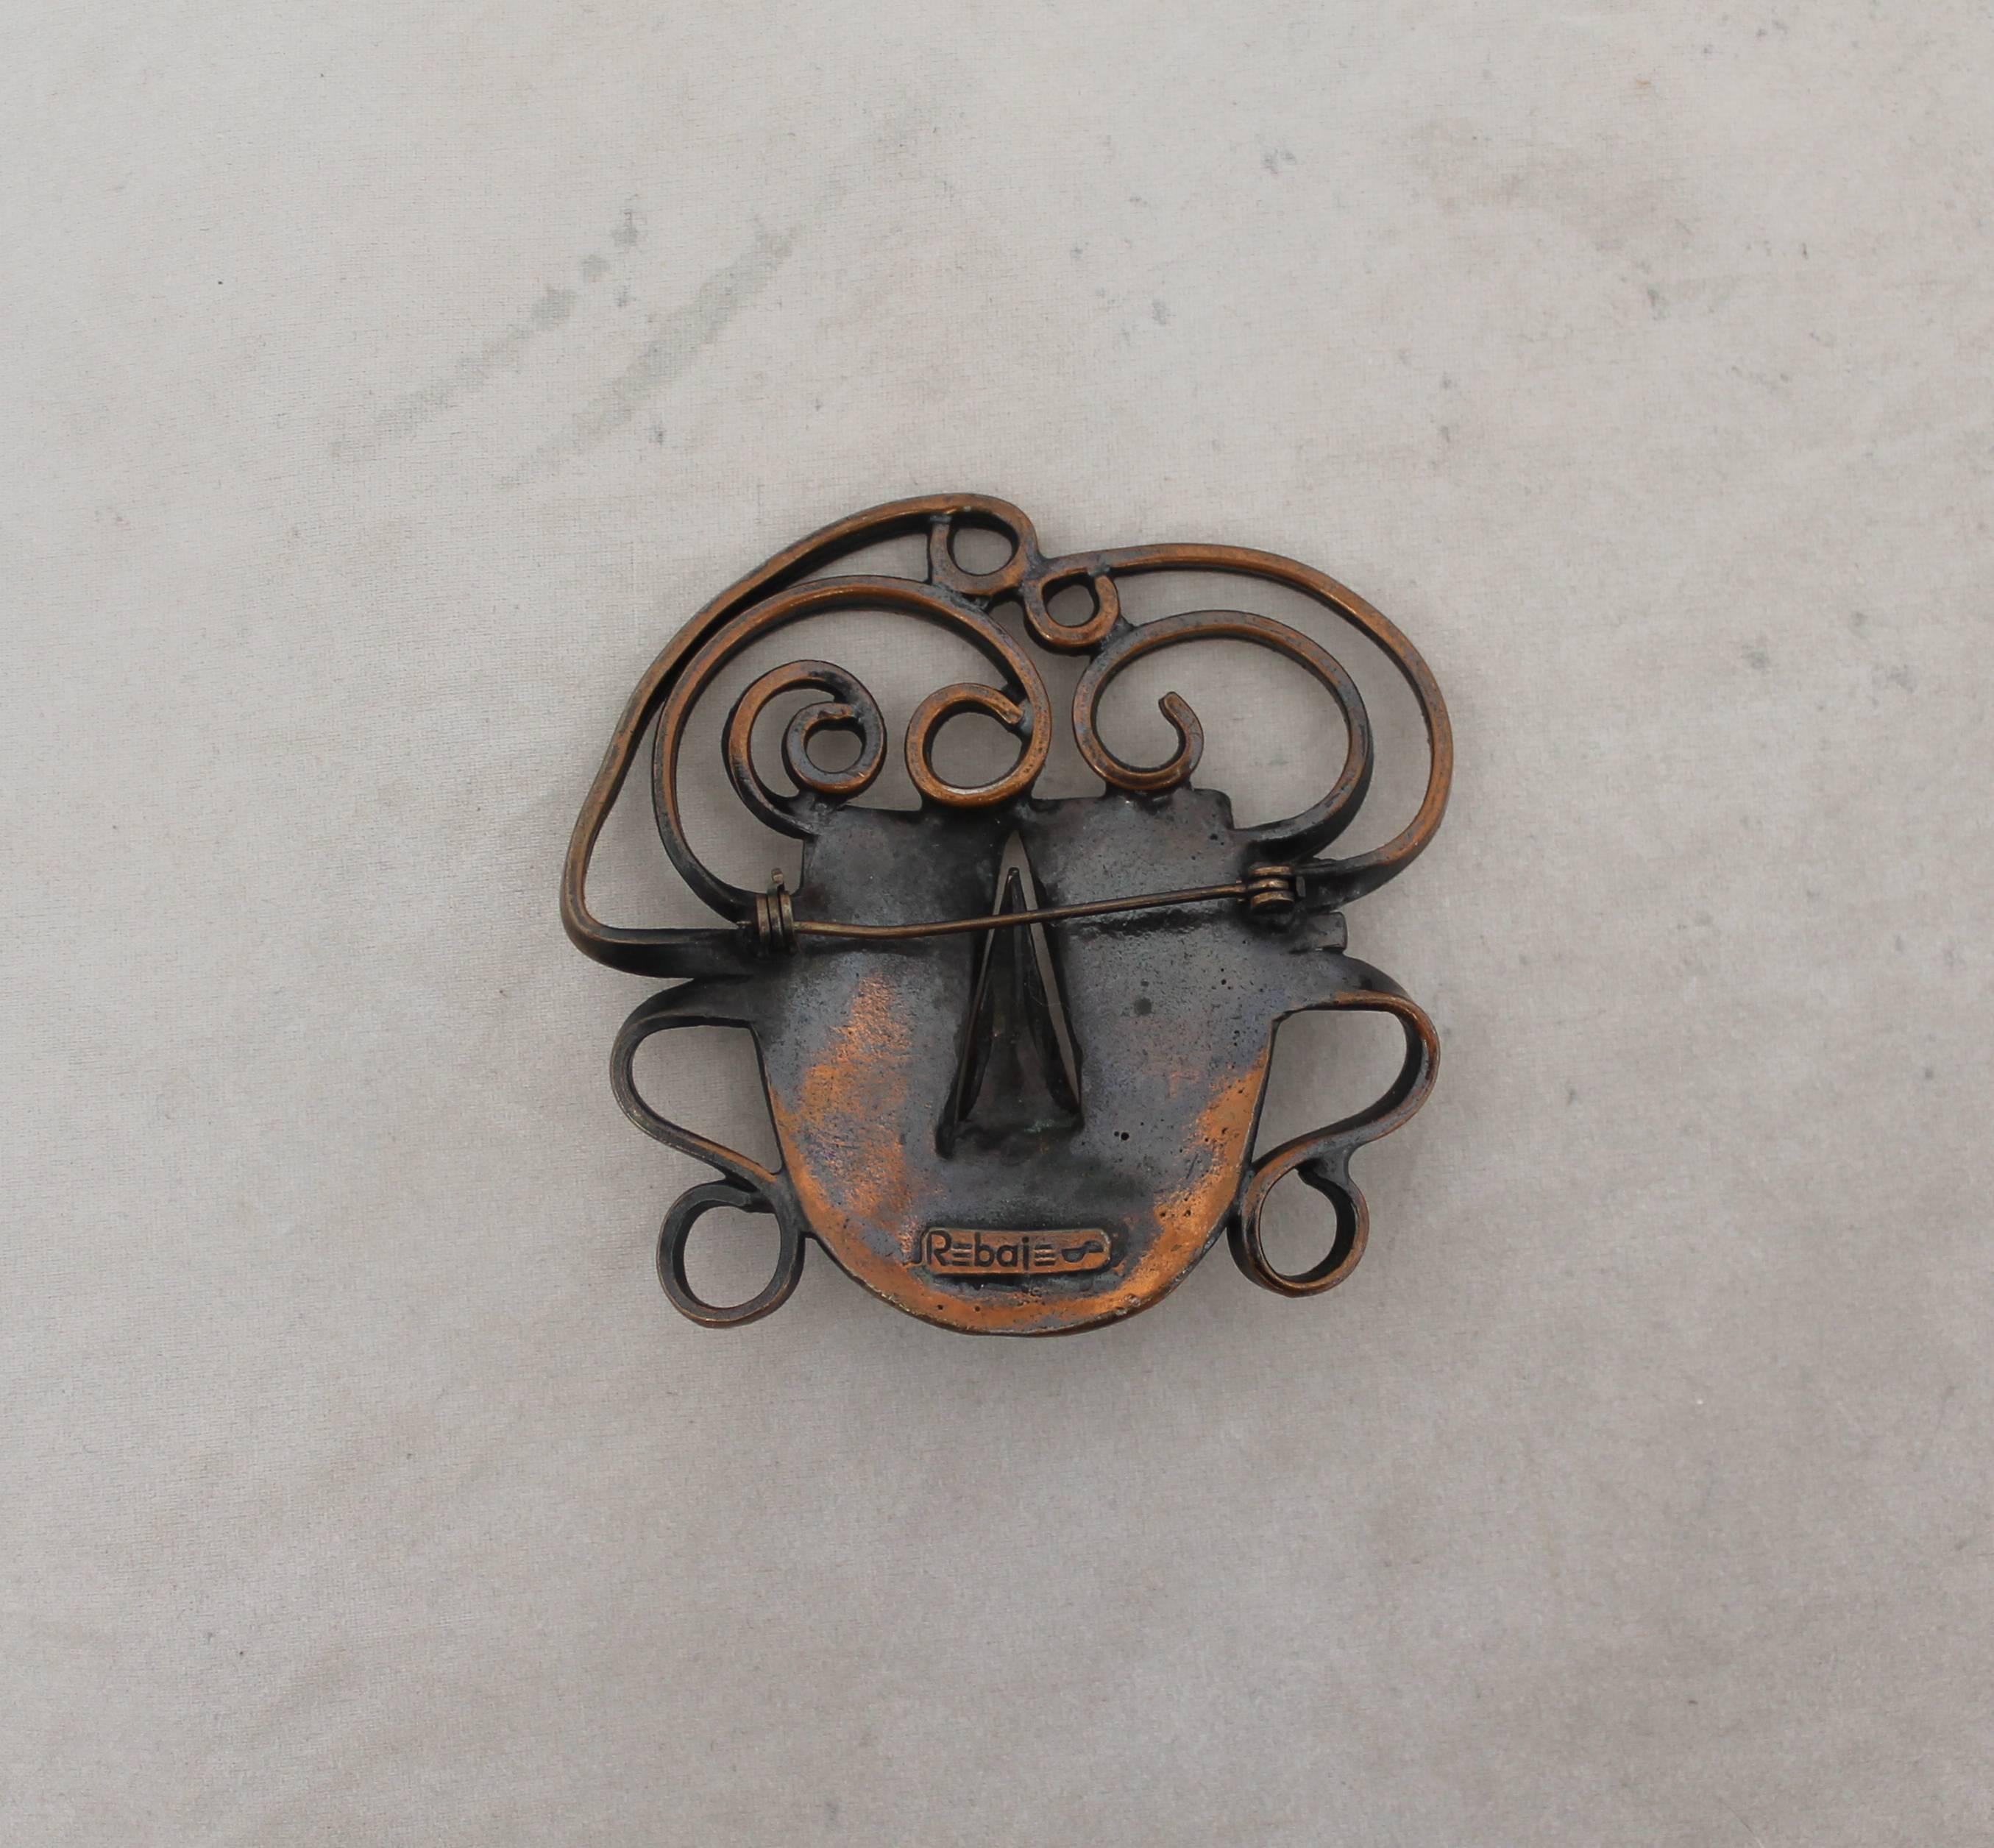 Rebajes Vintage Copper Brazilian Mask Pin - 1950's.  This unique vintage pin is in fair vintage condition with wear consistent with its age, mainly tarnishing in the front.  It features a 